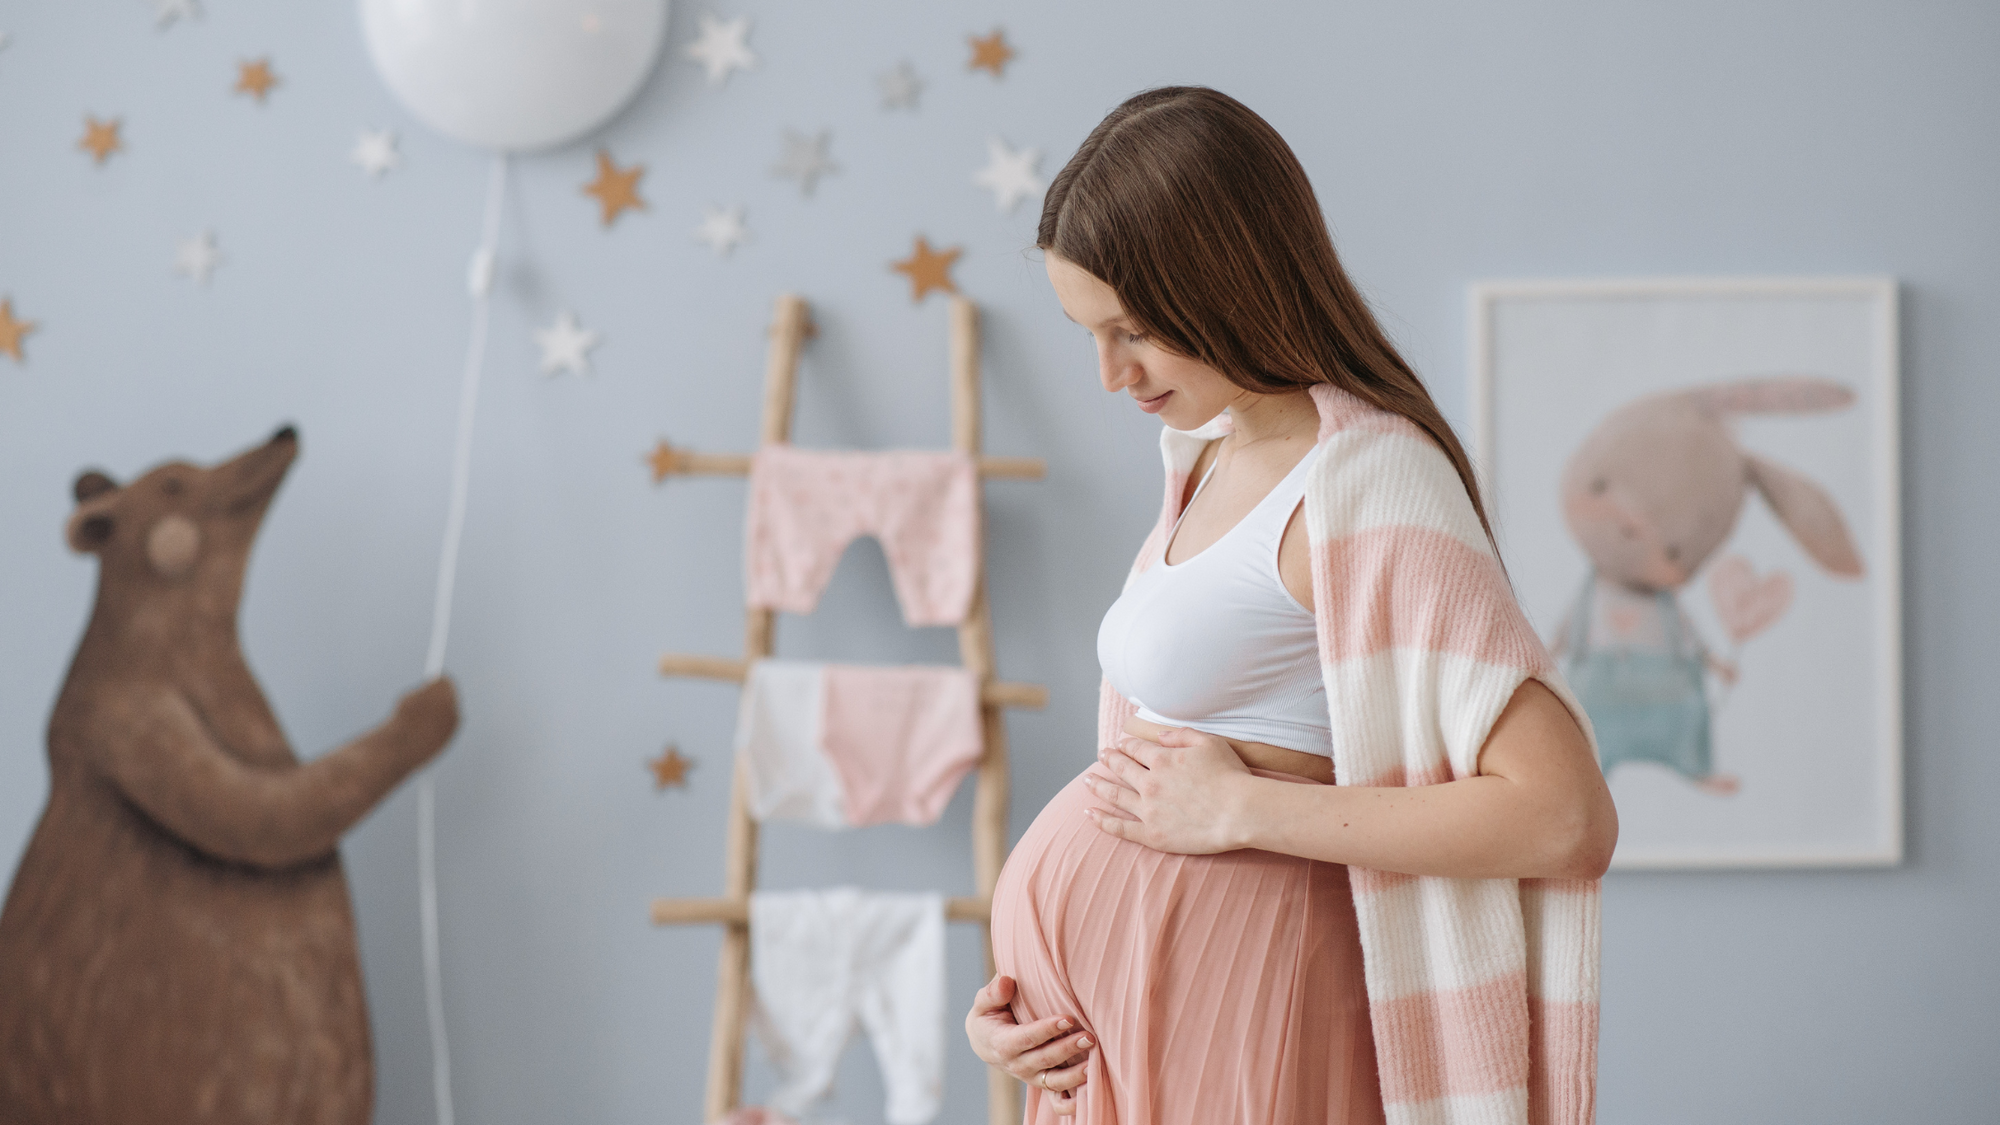 What are Common Discomforts During Pregnancy?